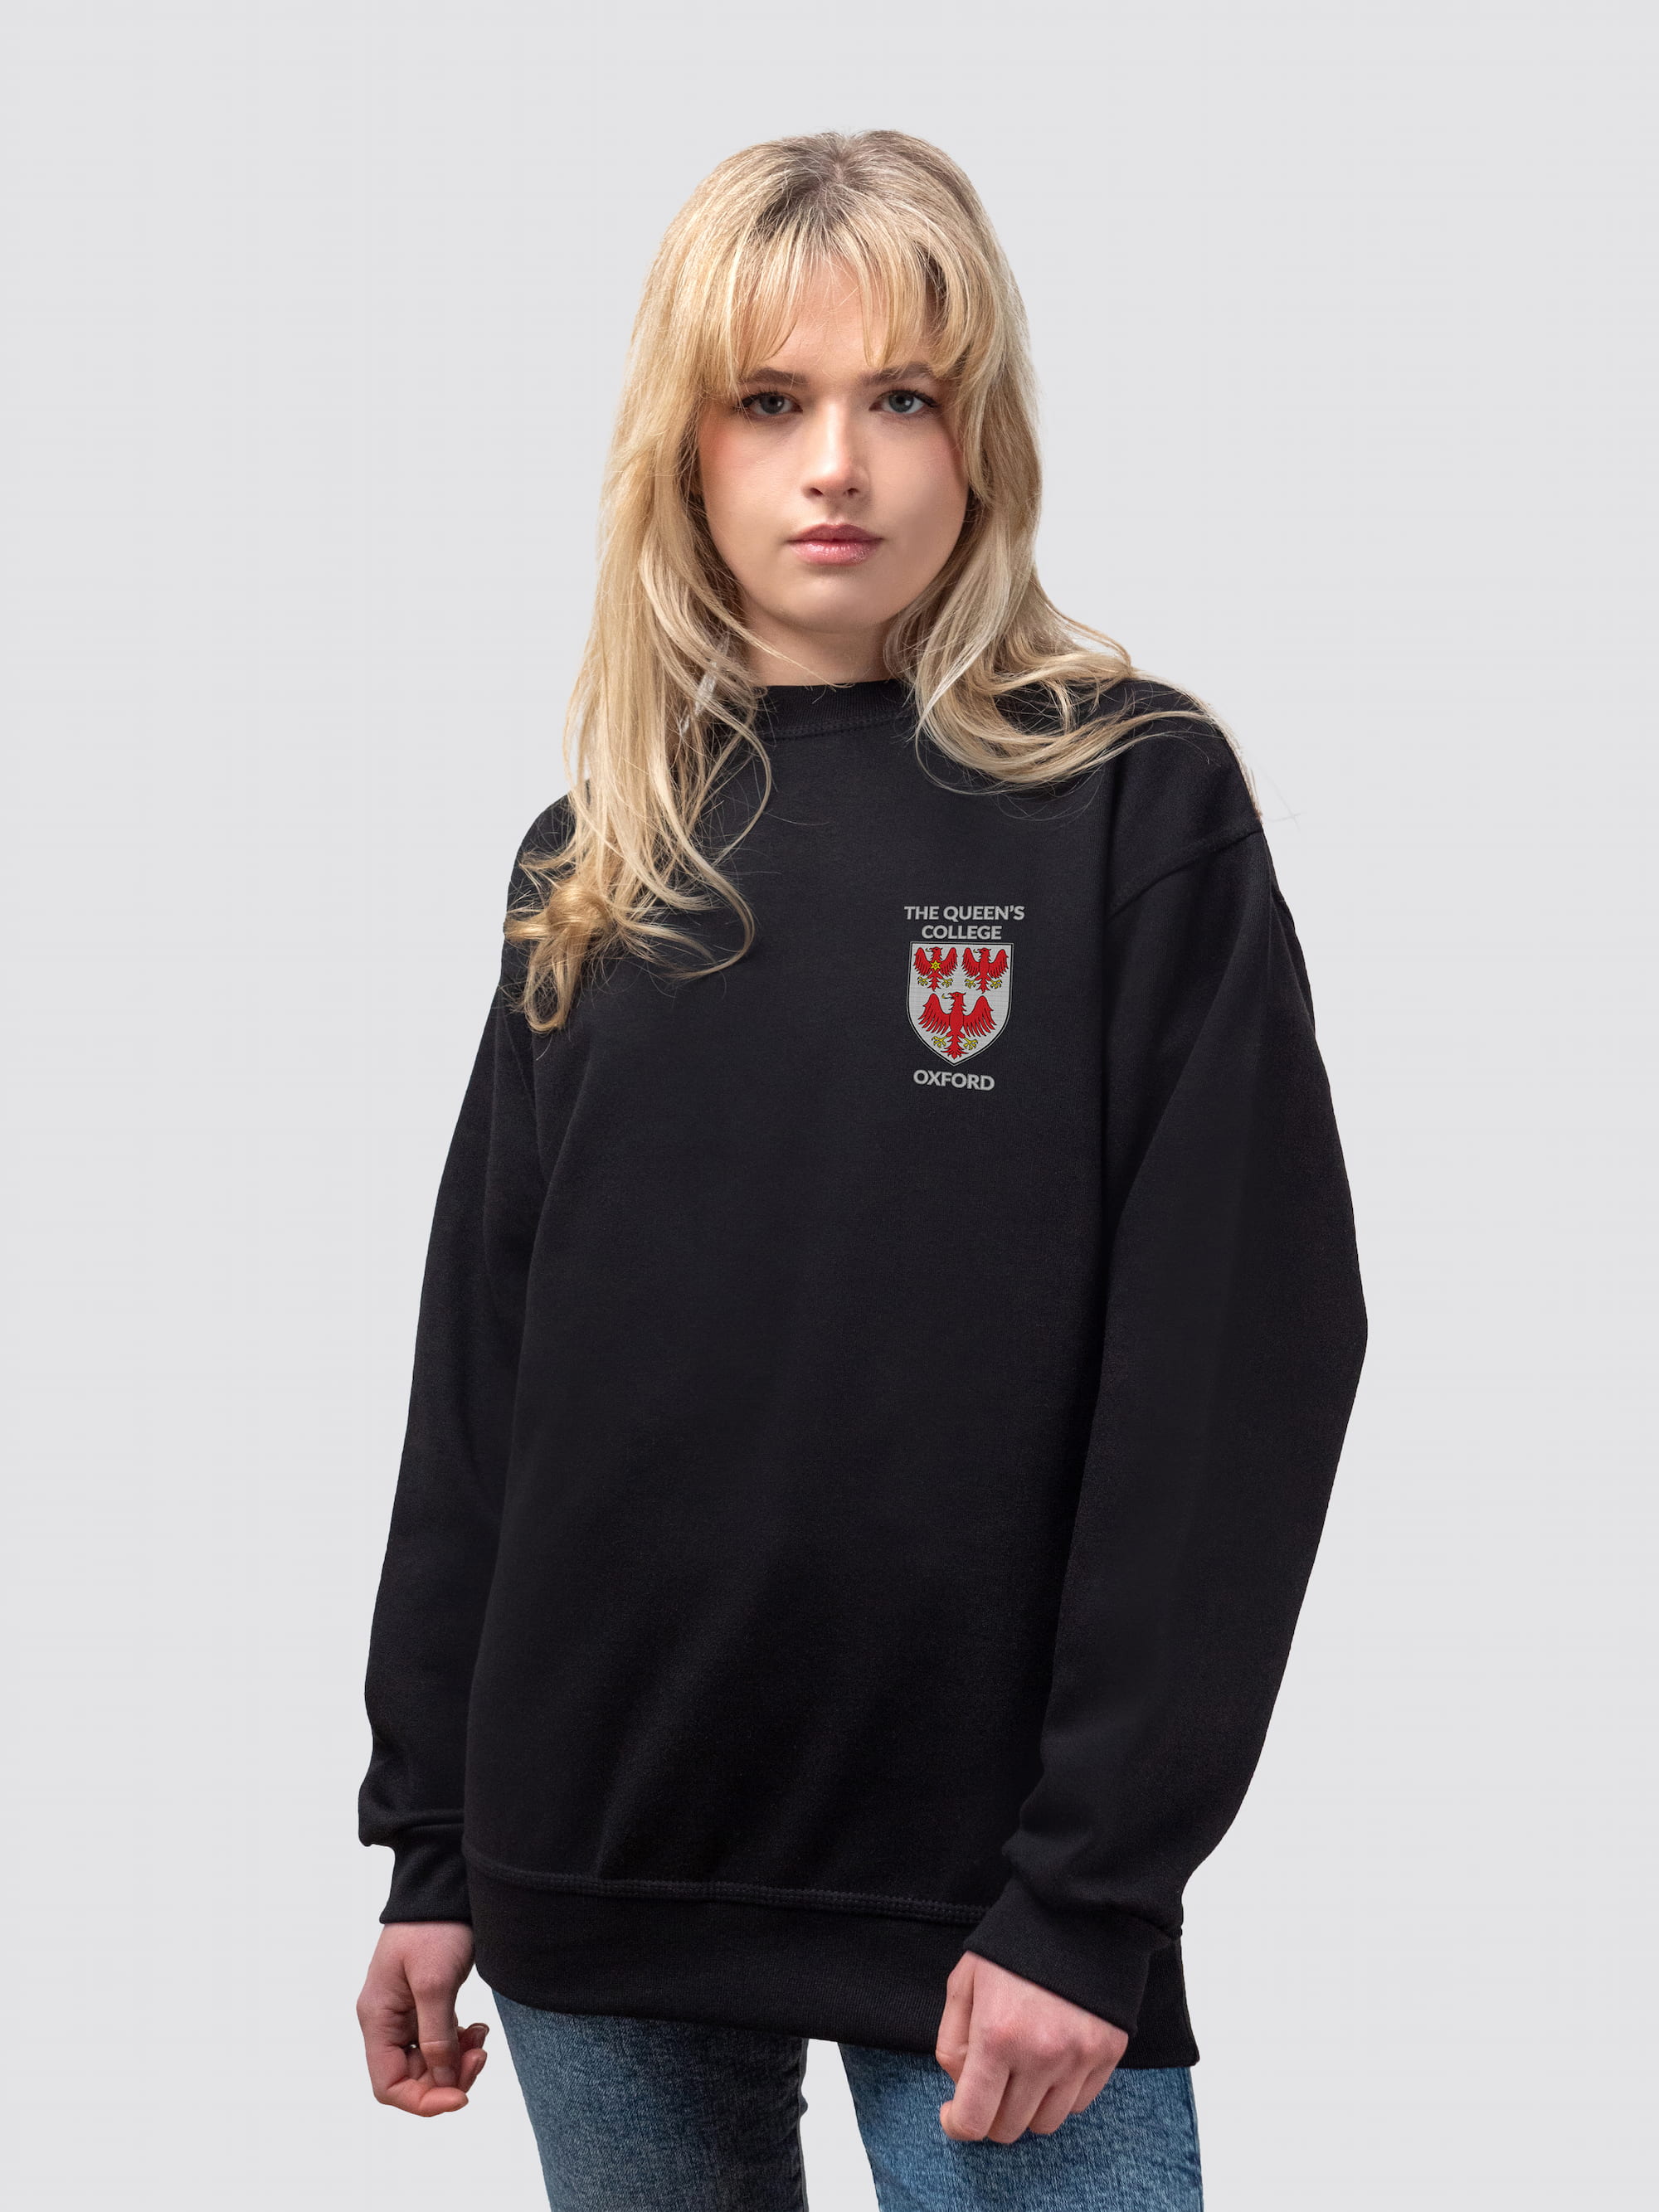 The Queen's crest on the front of a black, crew-neck sweatshirt